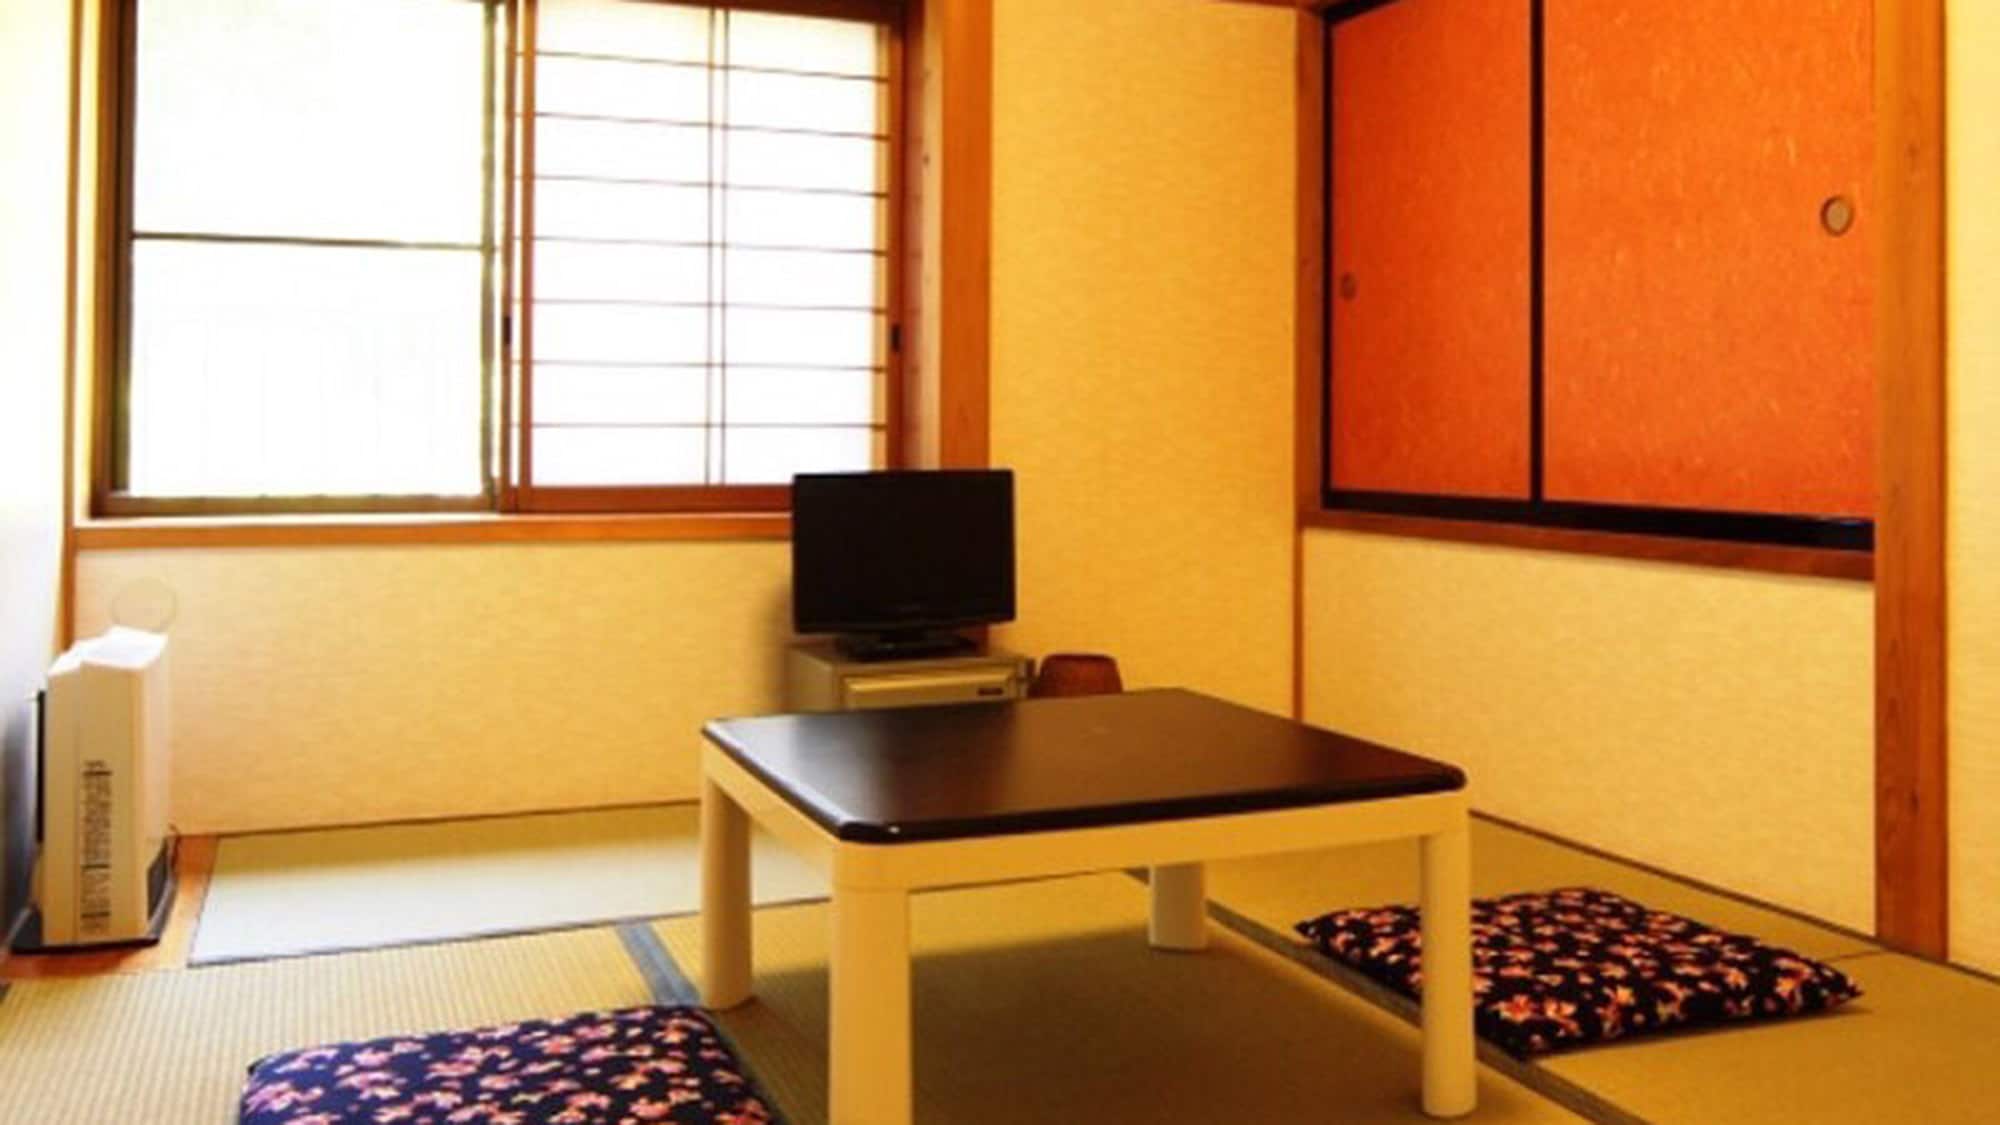 ・ [Guest room] Japanese-style room 6 tatami mats